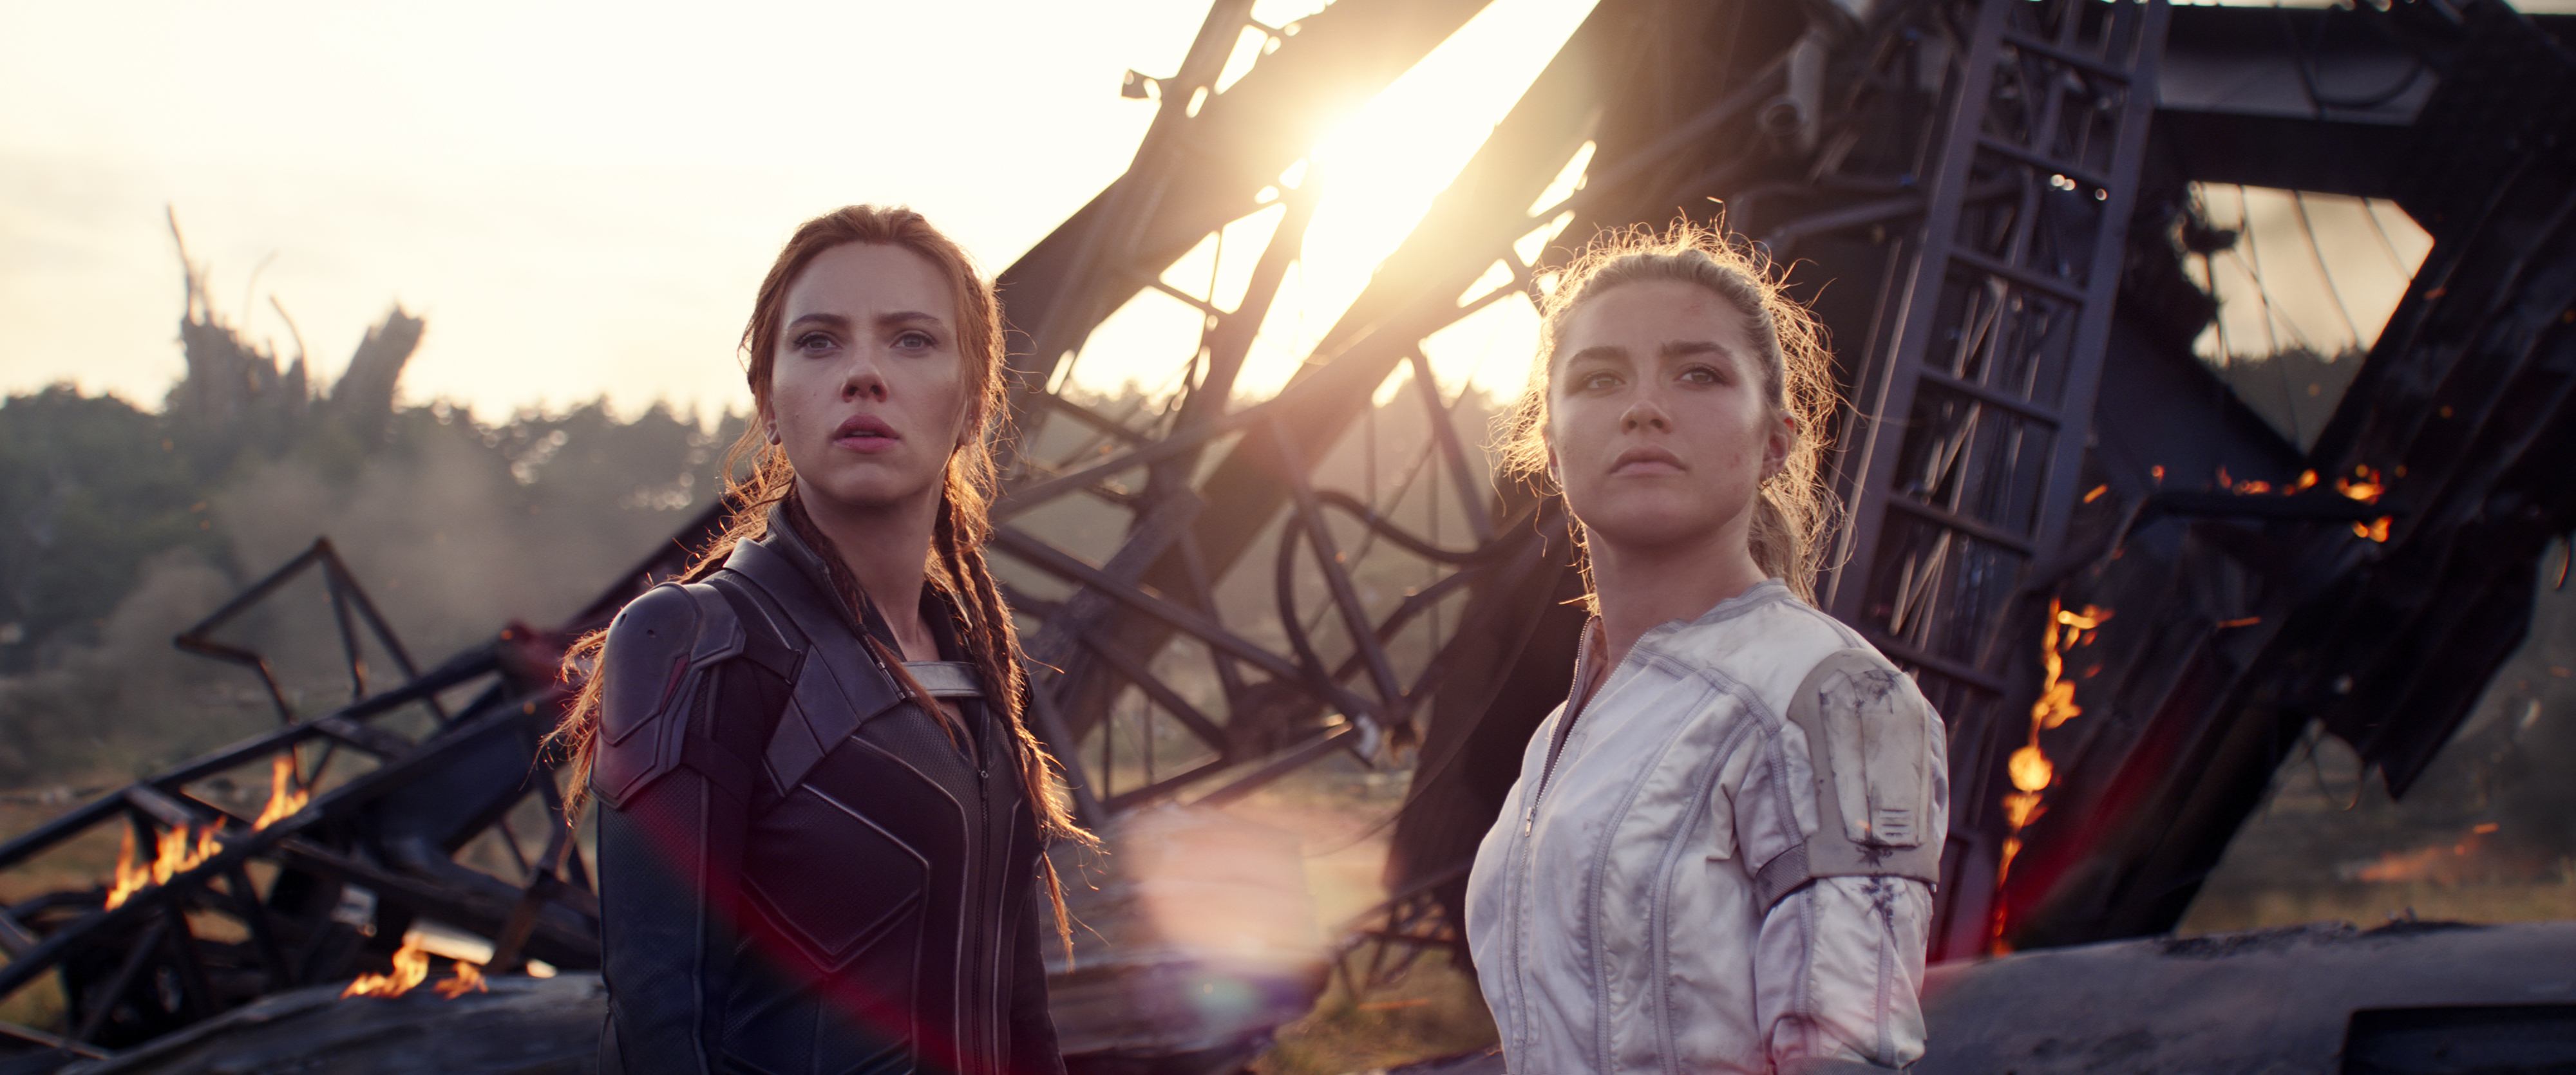 Box Offices Continue to Regain Momentum Ahead of ‘Black Widow’ Opening Weekend